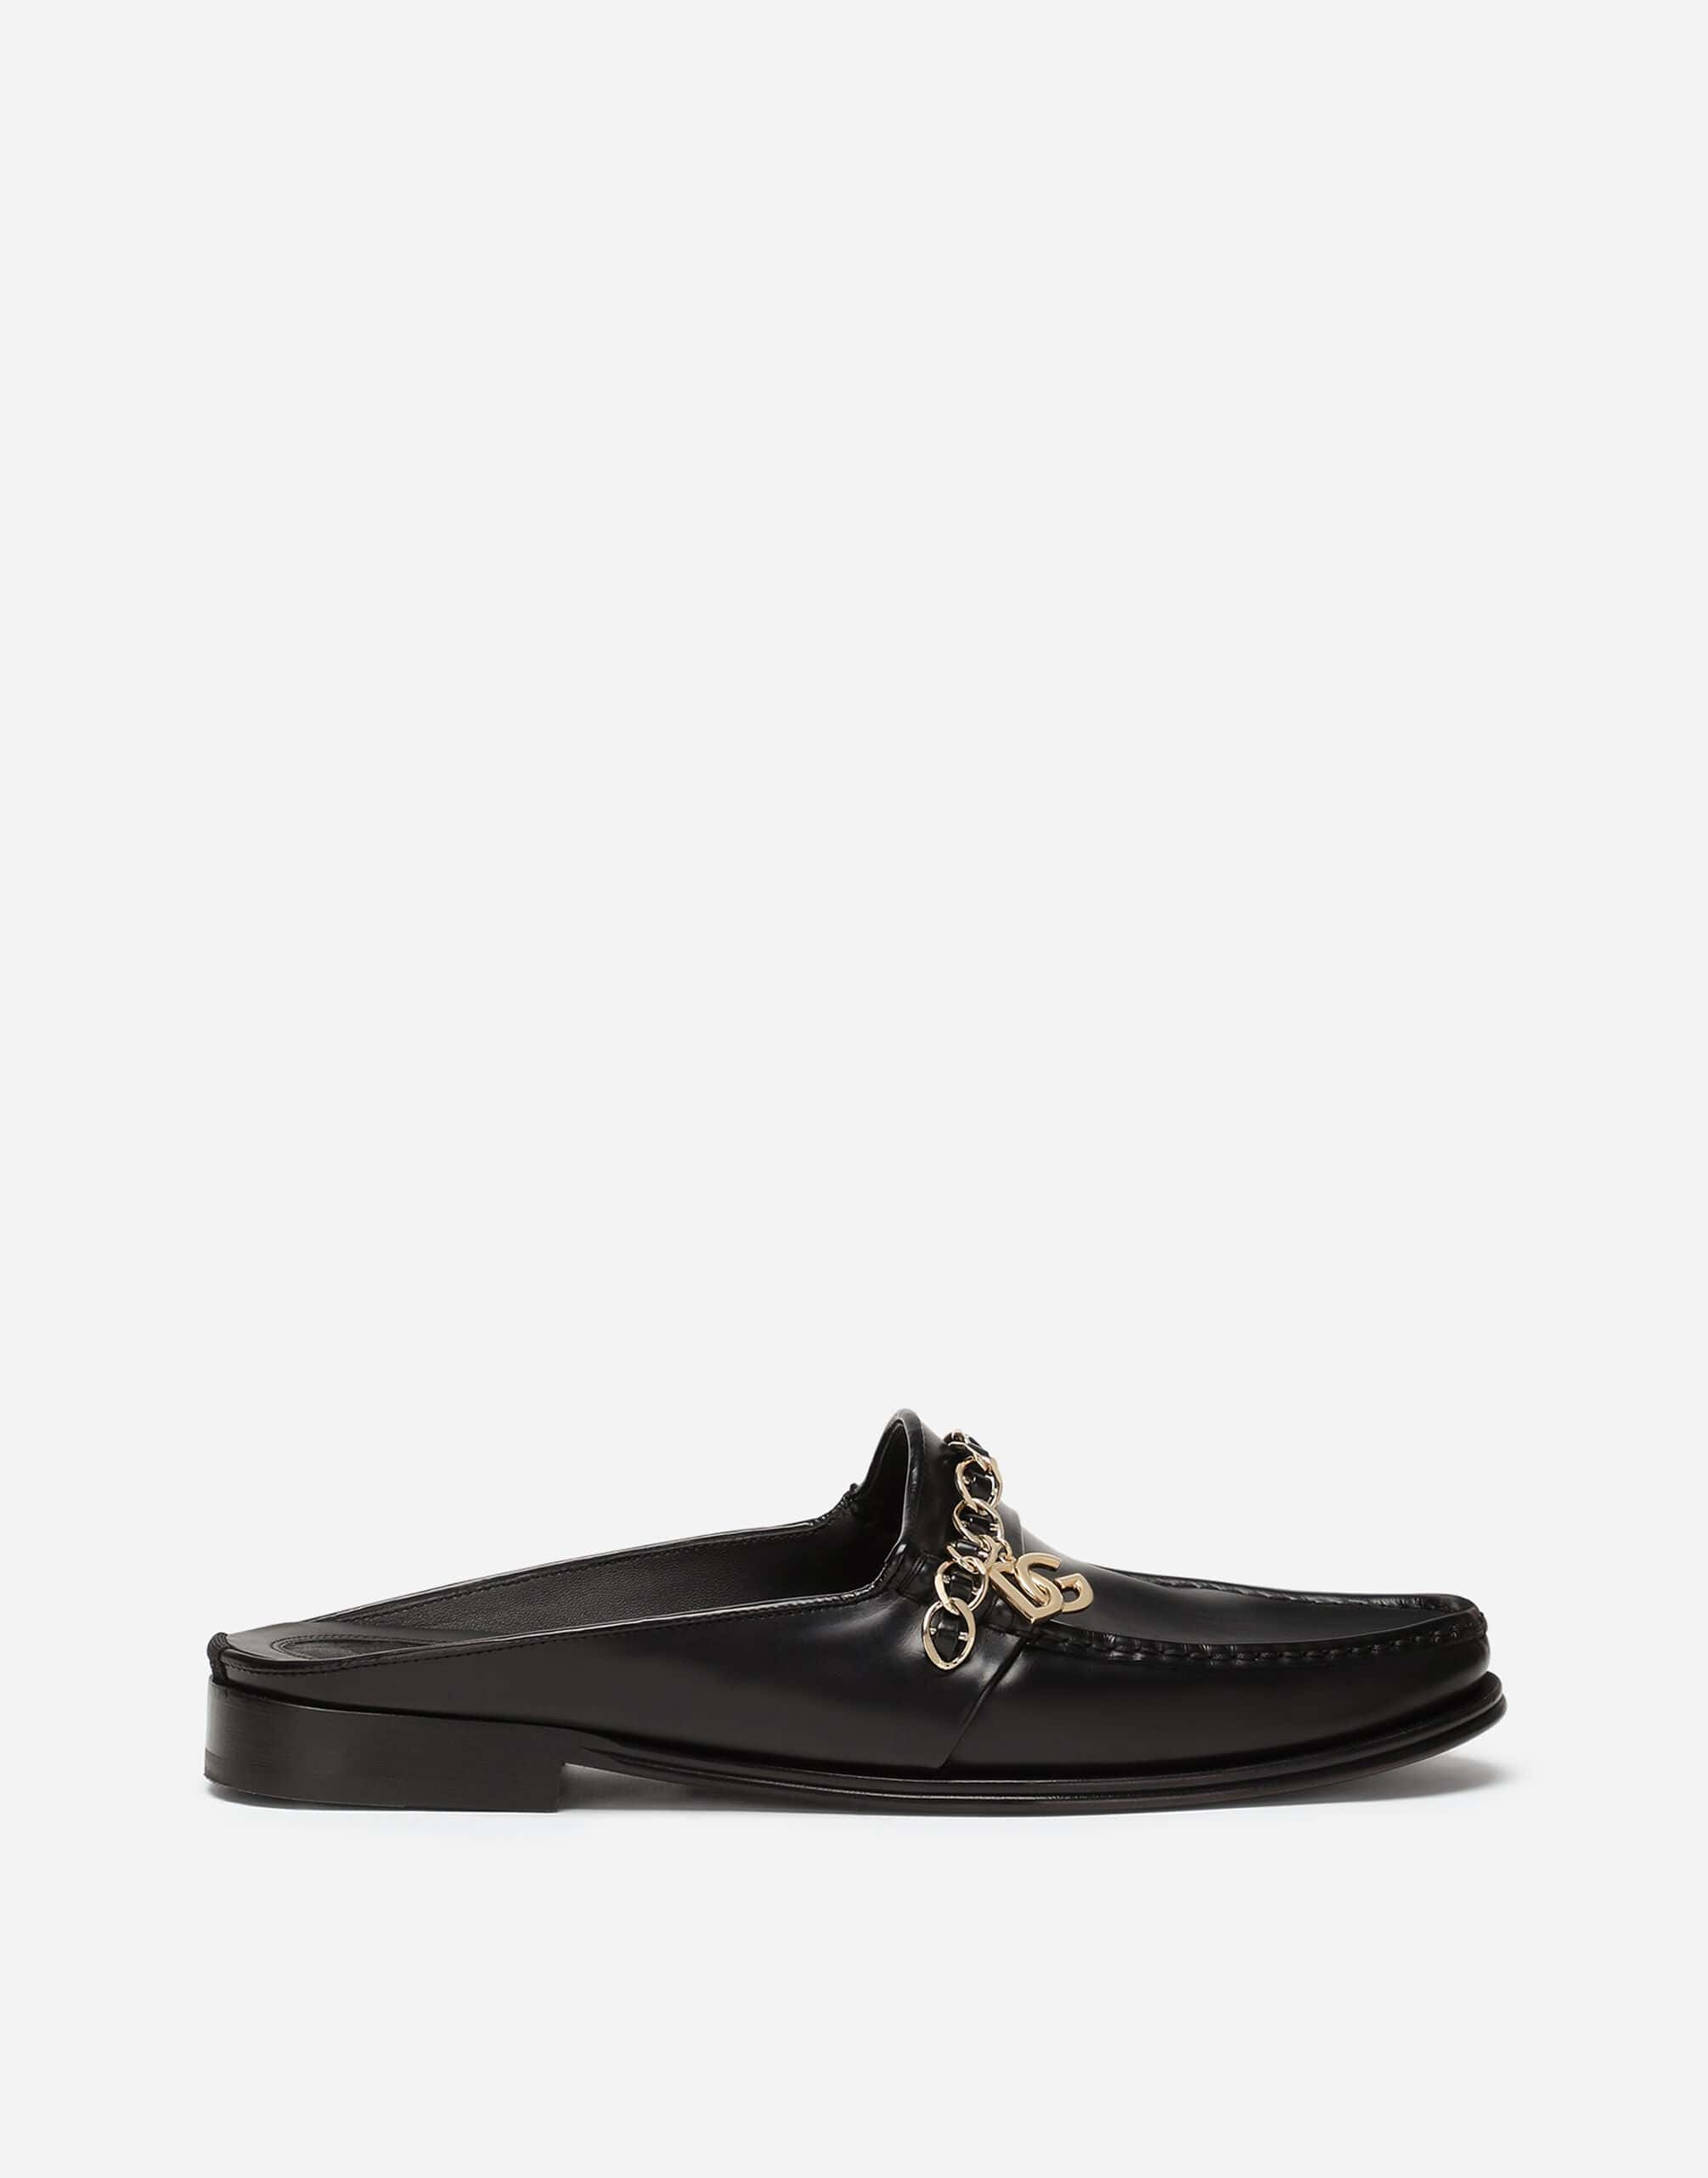 Dolce & Gabbana Visconti Leather Slippers